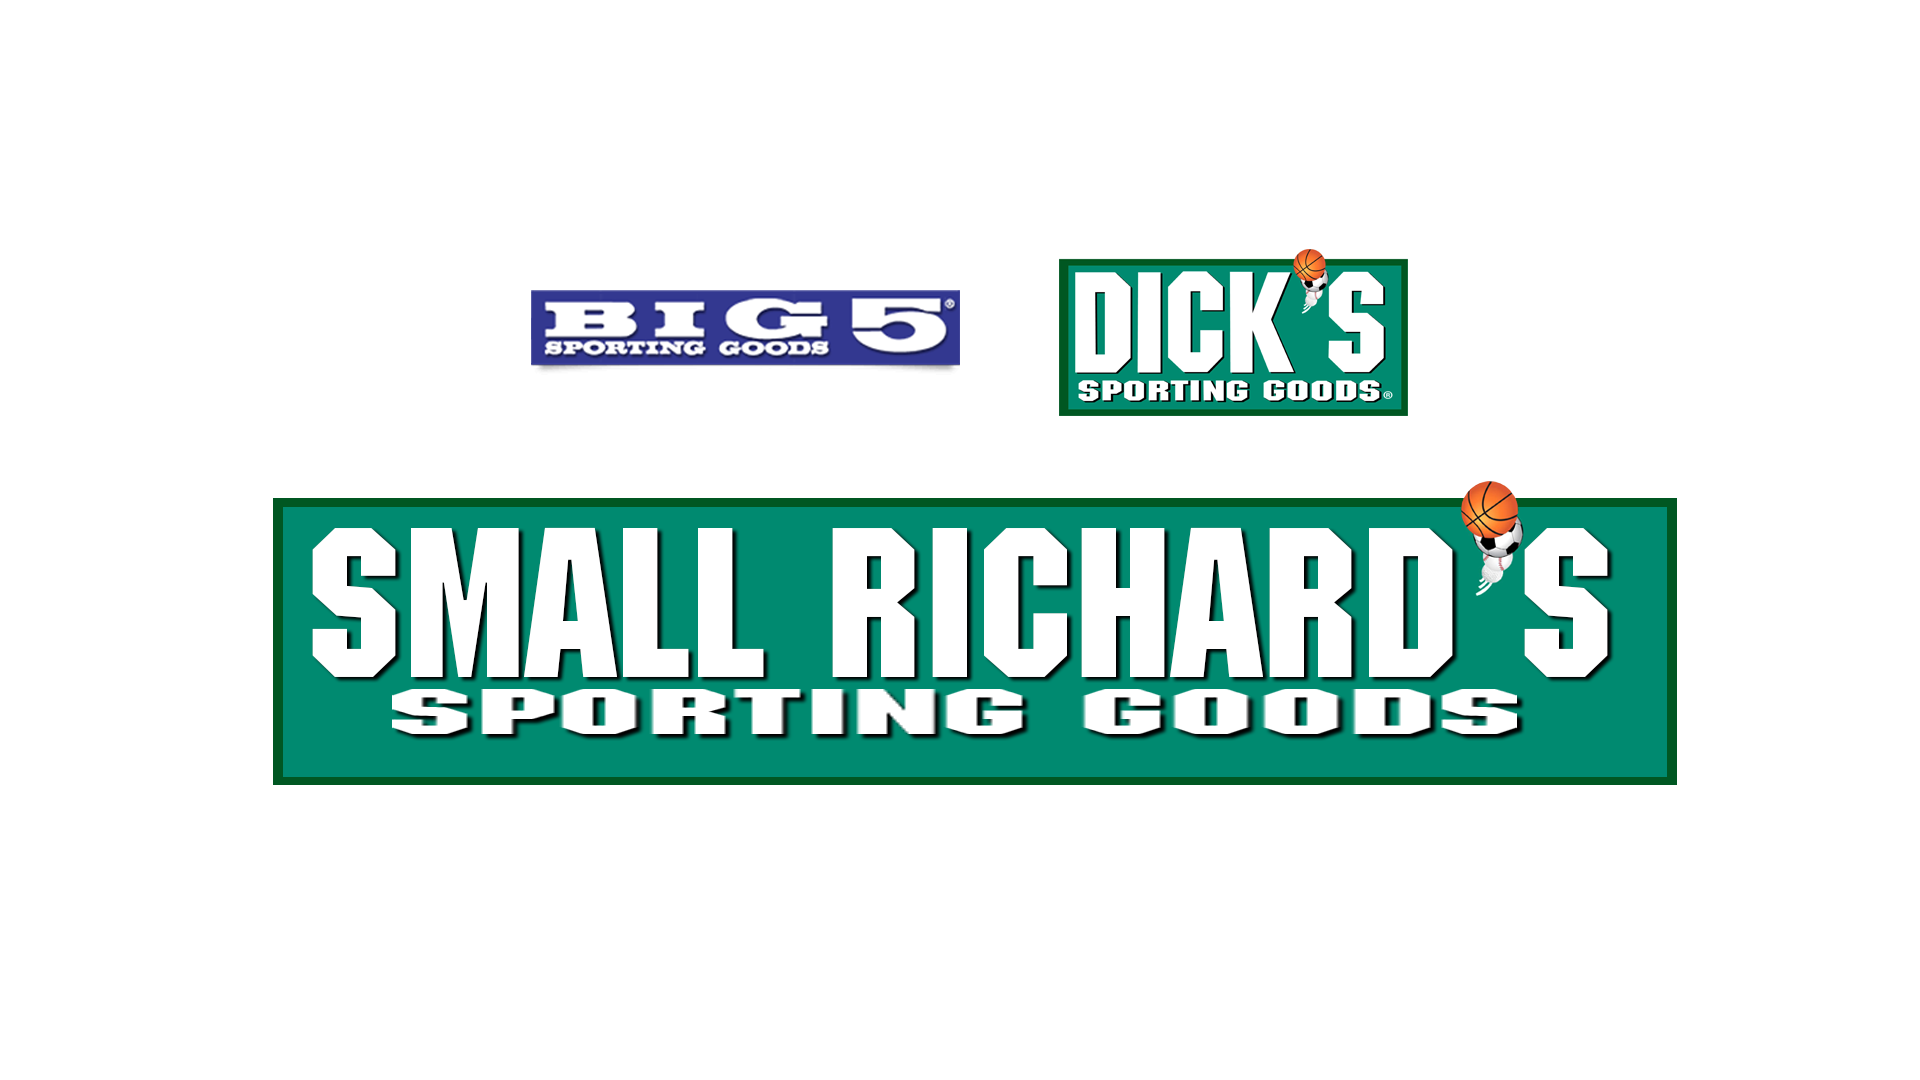 Dick’s Sporting Goods and Big 5 announce merger. New entity to be called Small Richard’s